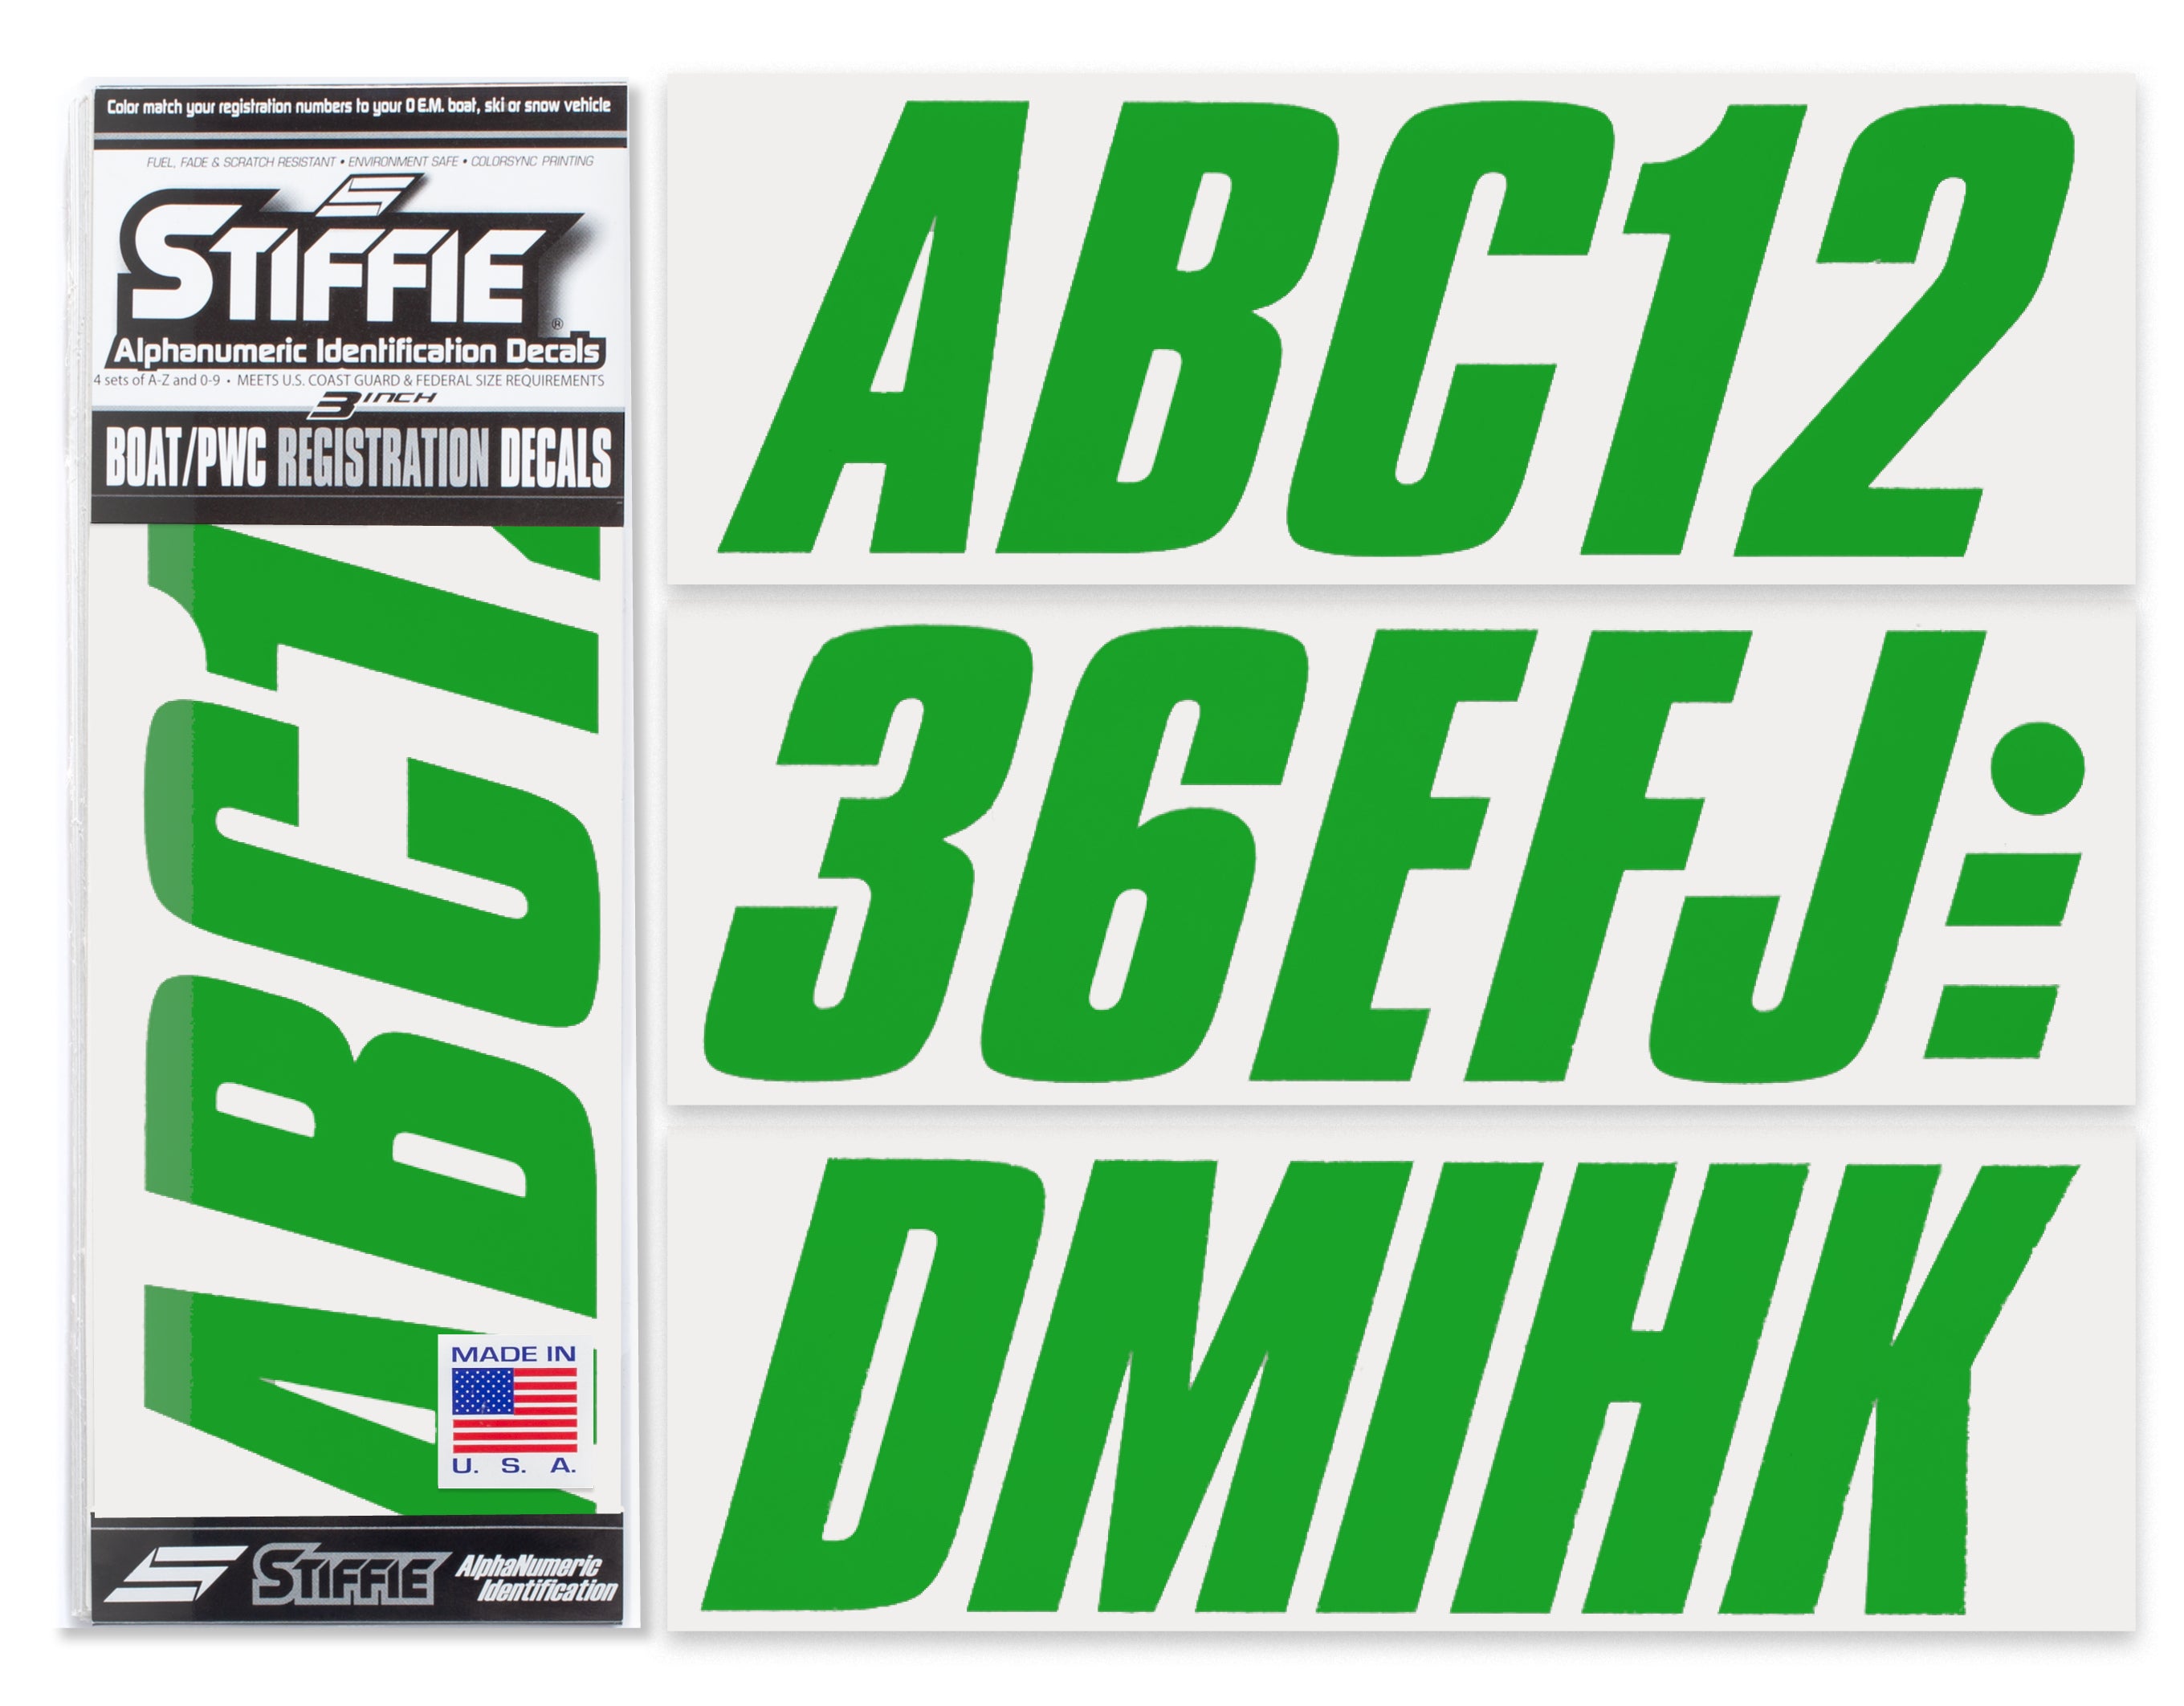 STIFFIE Shift Green 3" ID Kit Alpha-Numeric Registration Identification Numbers Stickers Decals for Boats & Personal Watercraft